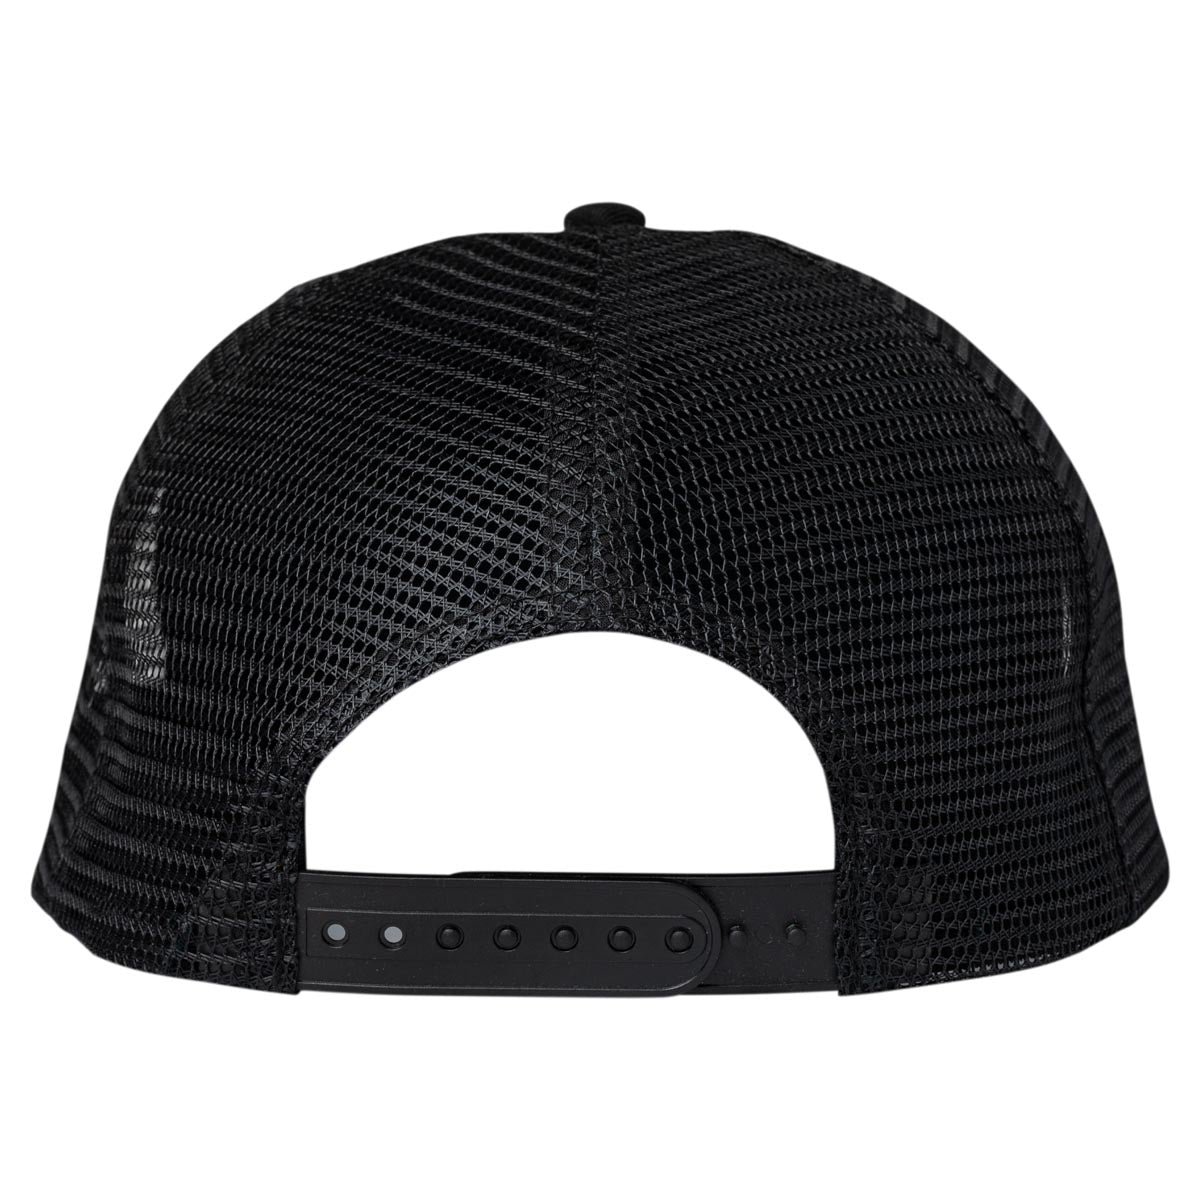 There Heart Snapback Hat - Black image 2